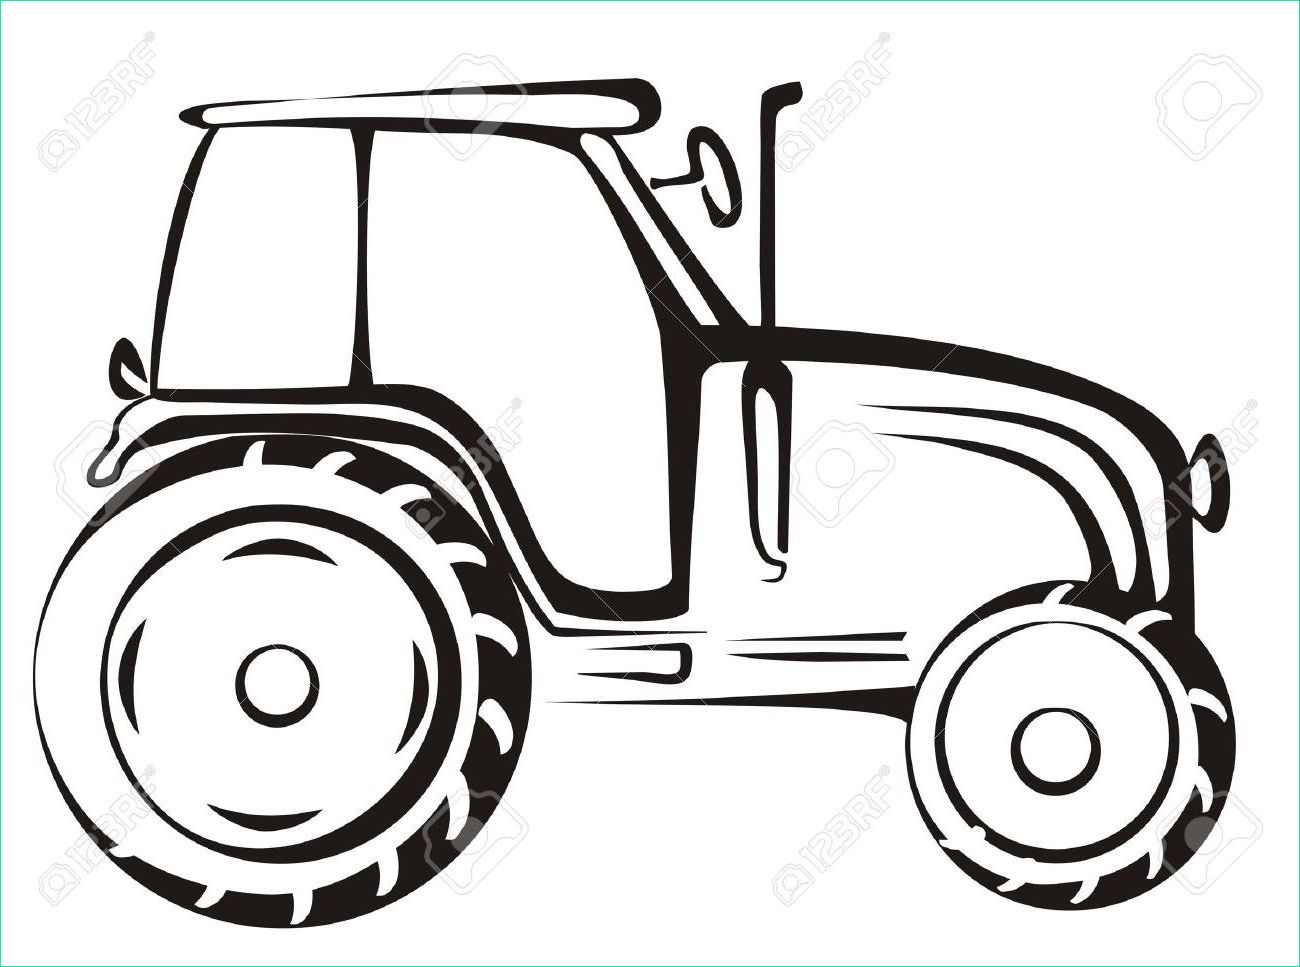 tractor clipart black and white